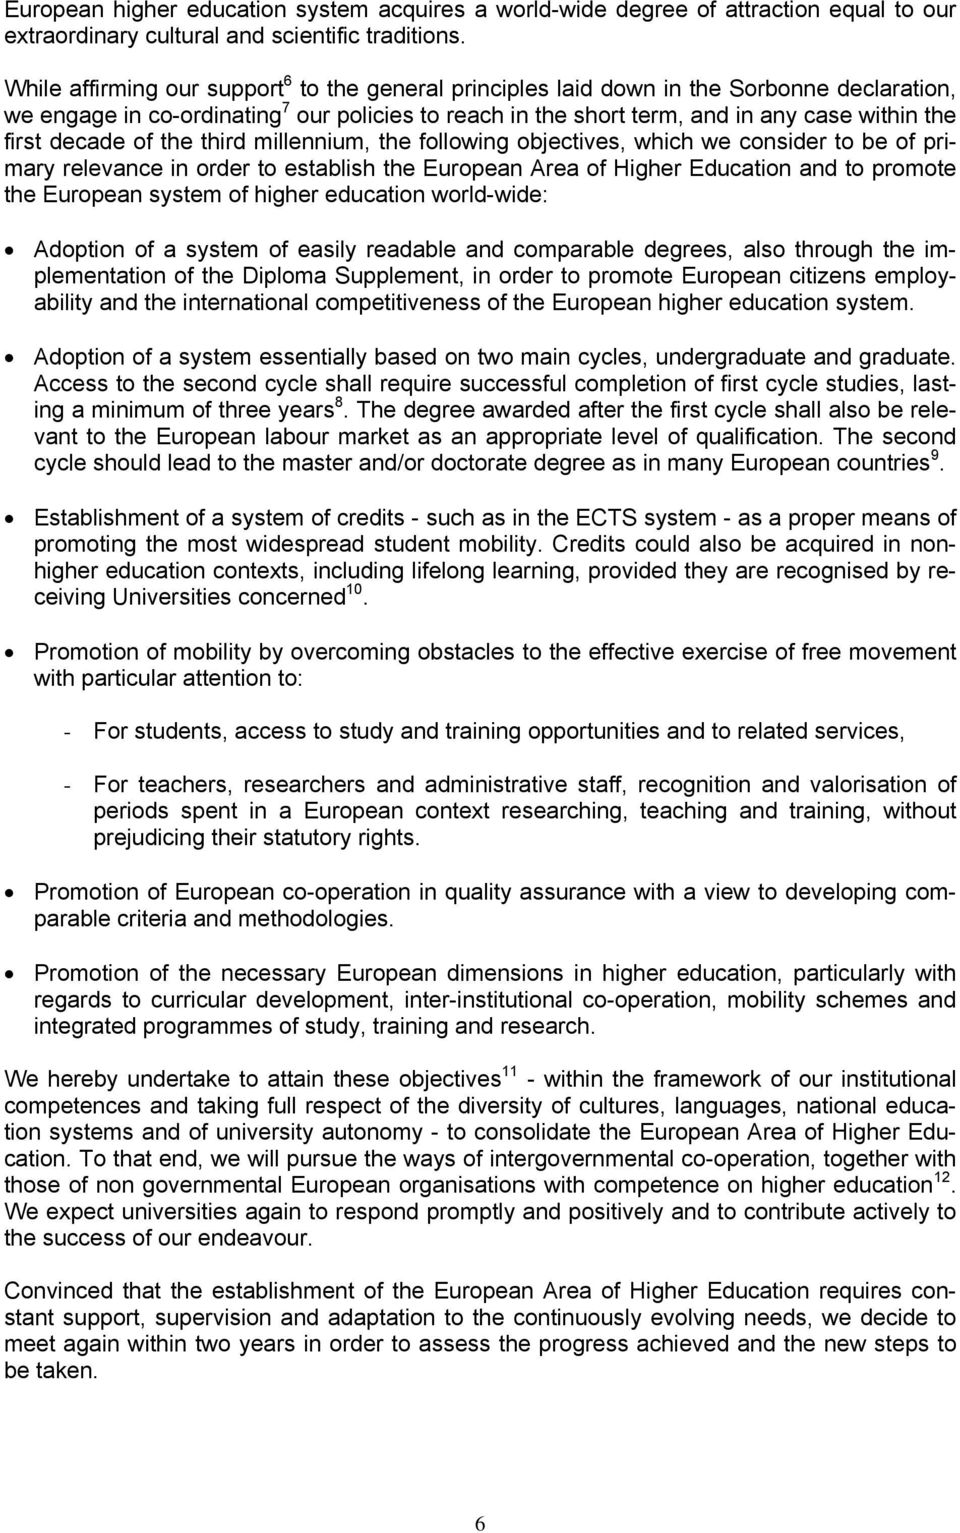 decade of the third millennium, the following objectives, which we consider to be of primary relevance in order to establish the European Area of Higher Education and to promote the European system